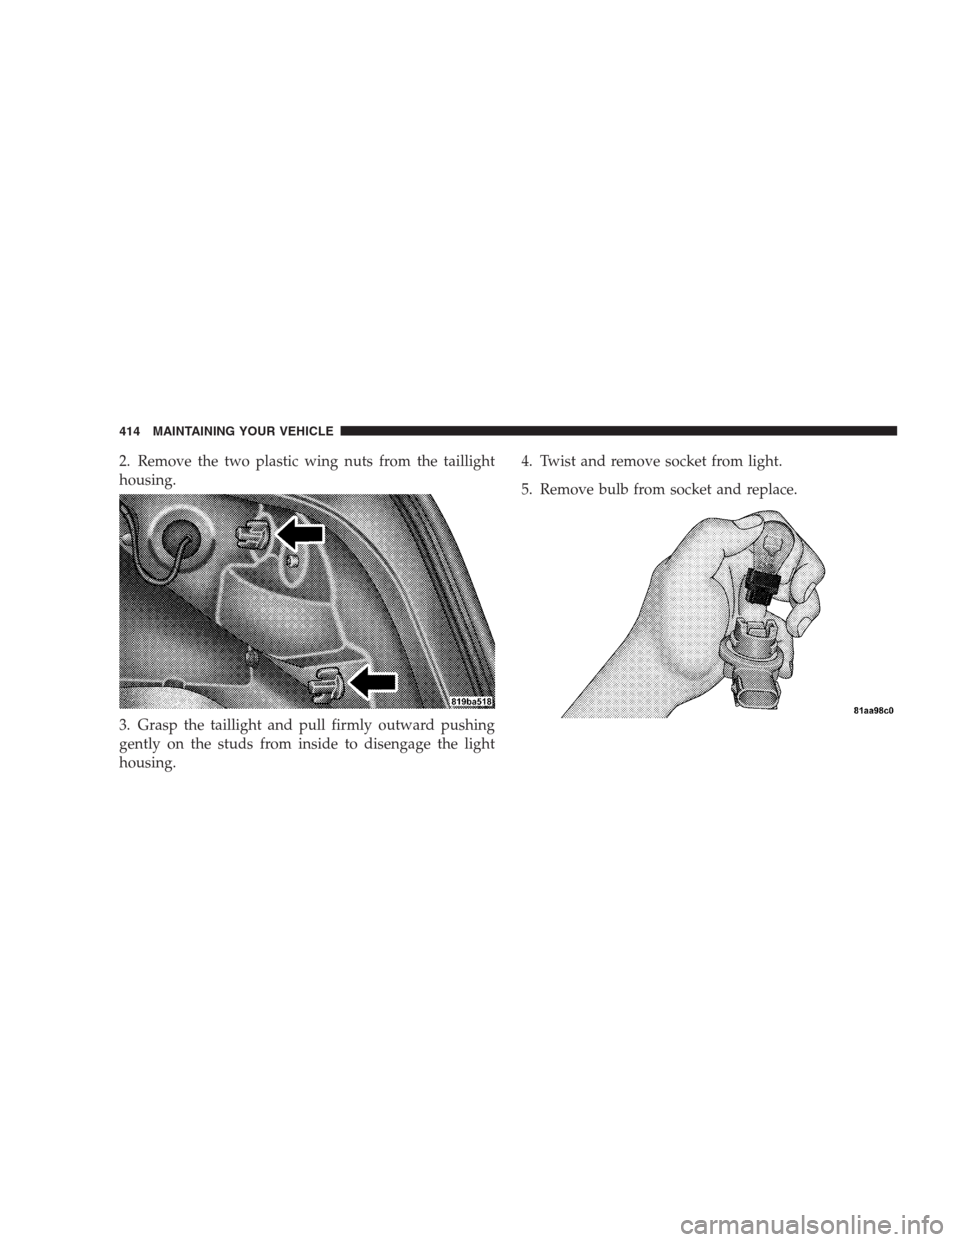 DODGE AVENGER 2009 2.G Owners Manual 2. Remove the two plastic wing nuts from the taillight
housing.
3. Grasp the taillight and pull firmly outward pushing
gently on the studs from inside to disengage the light
housing.4. Twist and remov